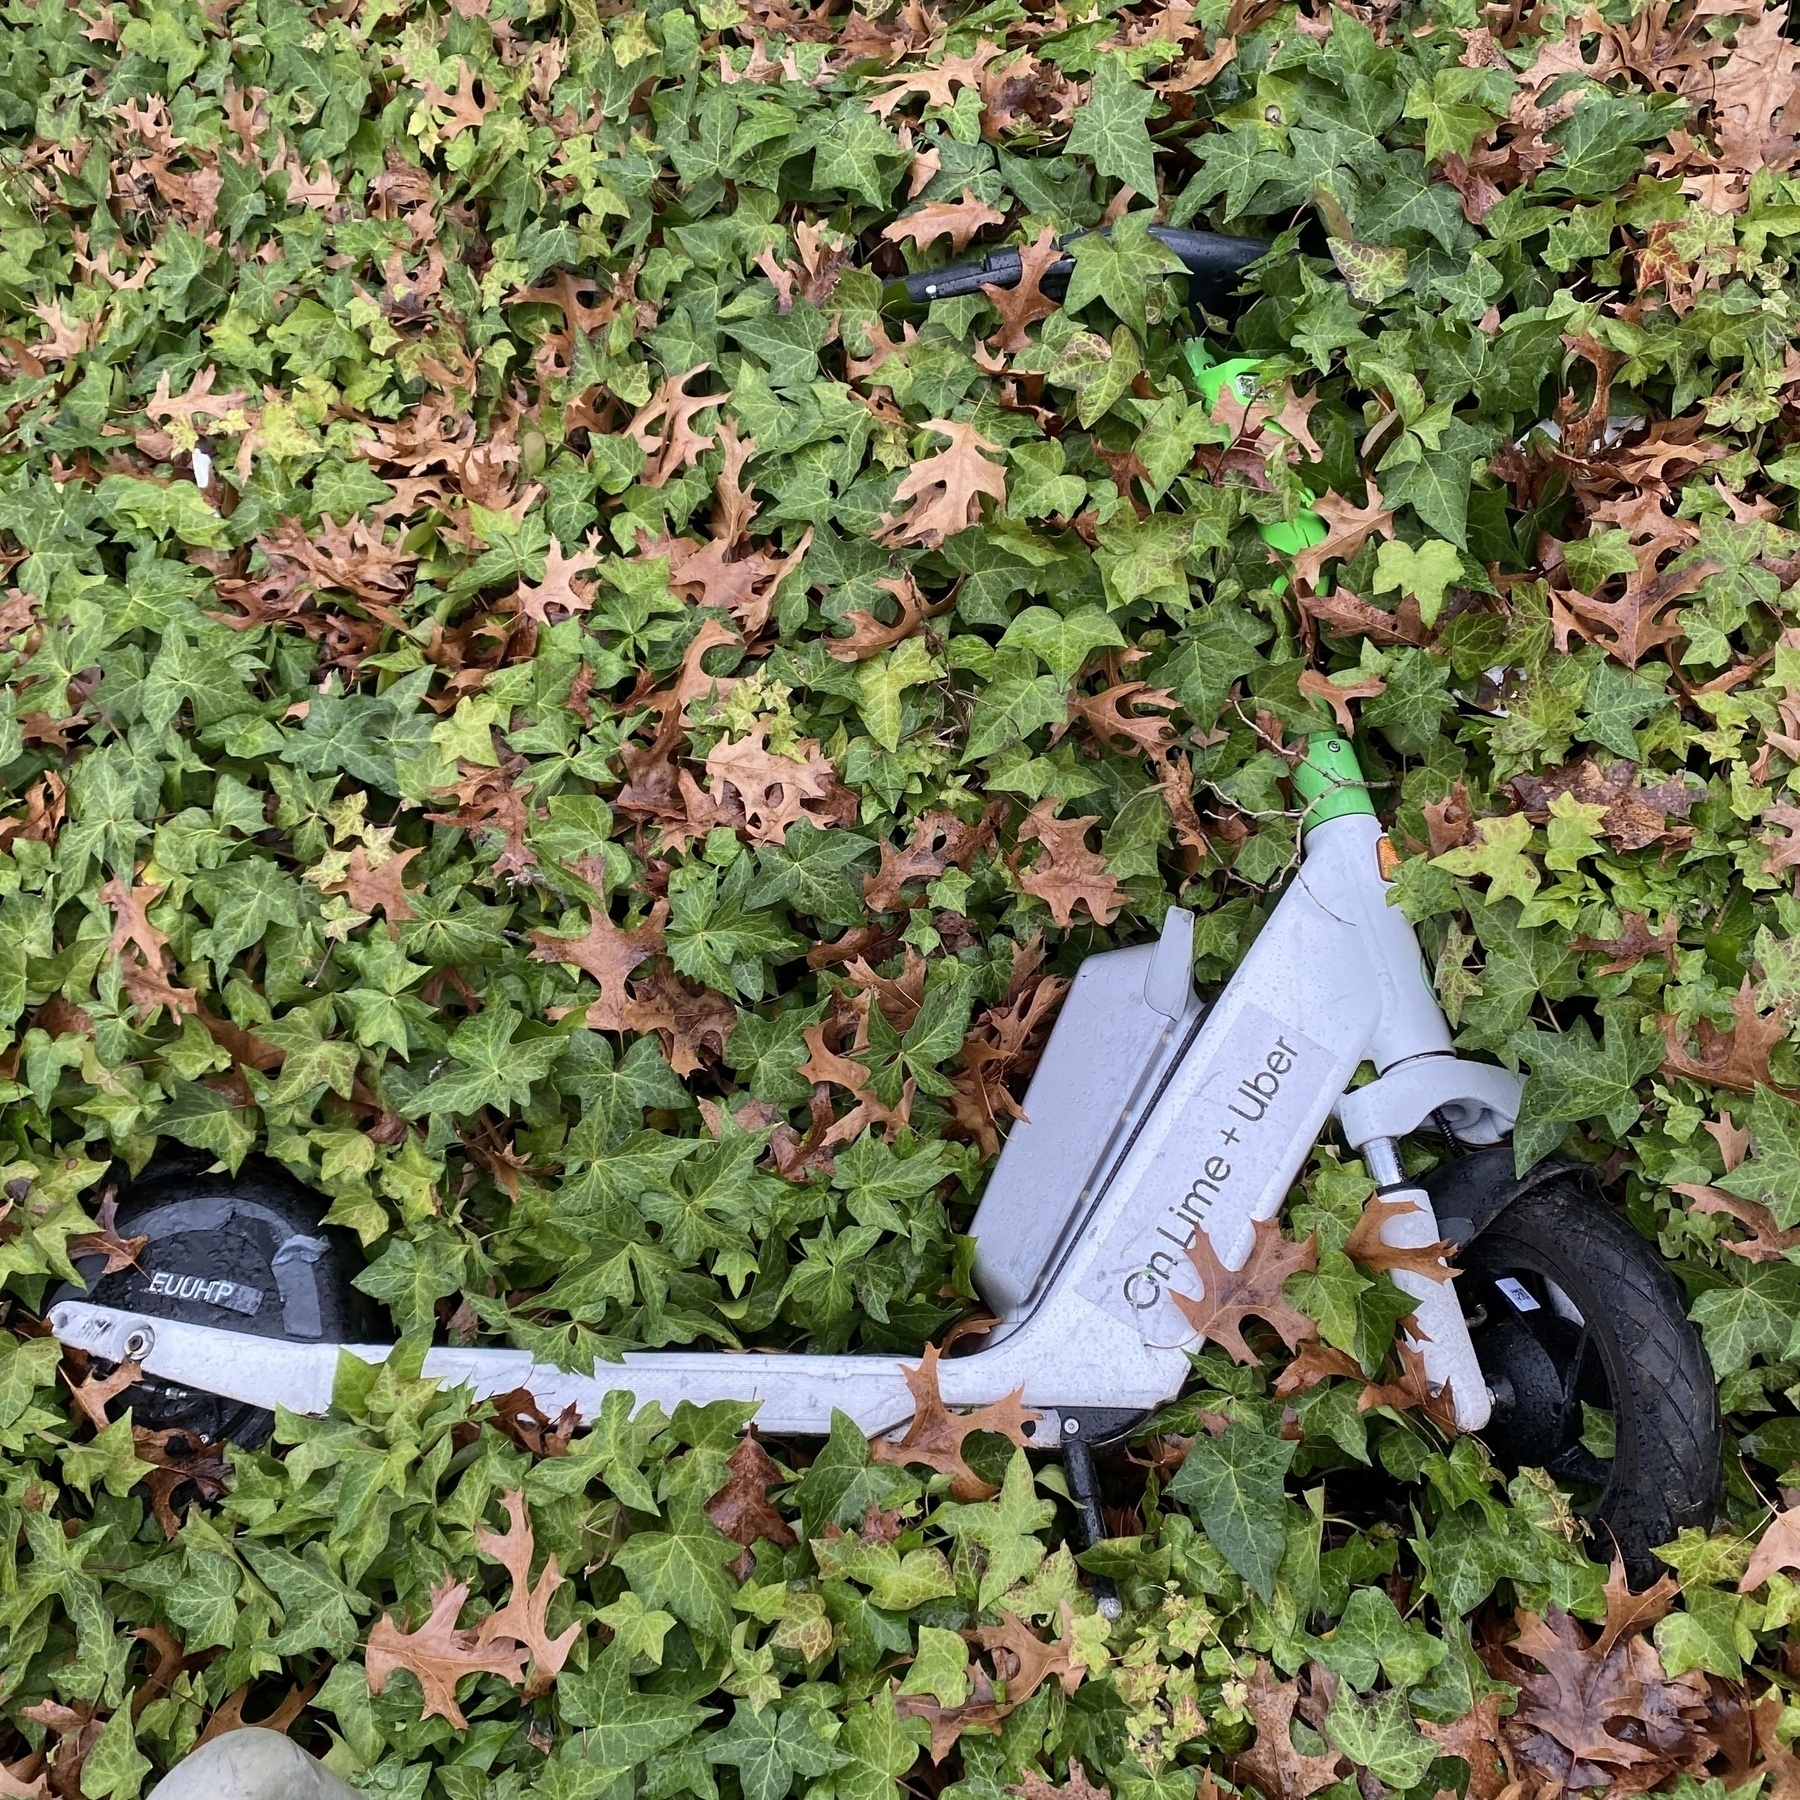 A discarded Lime electric scooter on it's side in a field of ivy with foliage growing over it.